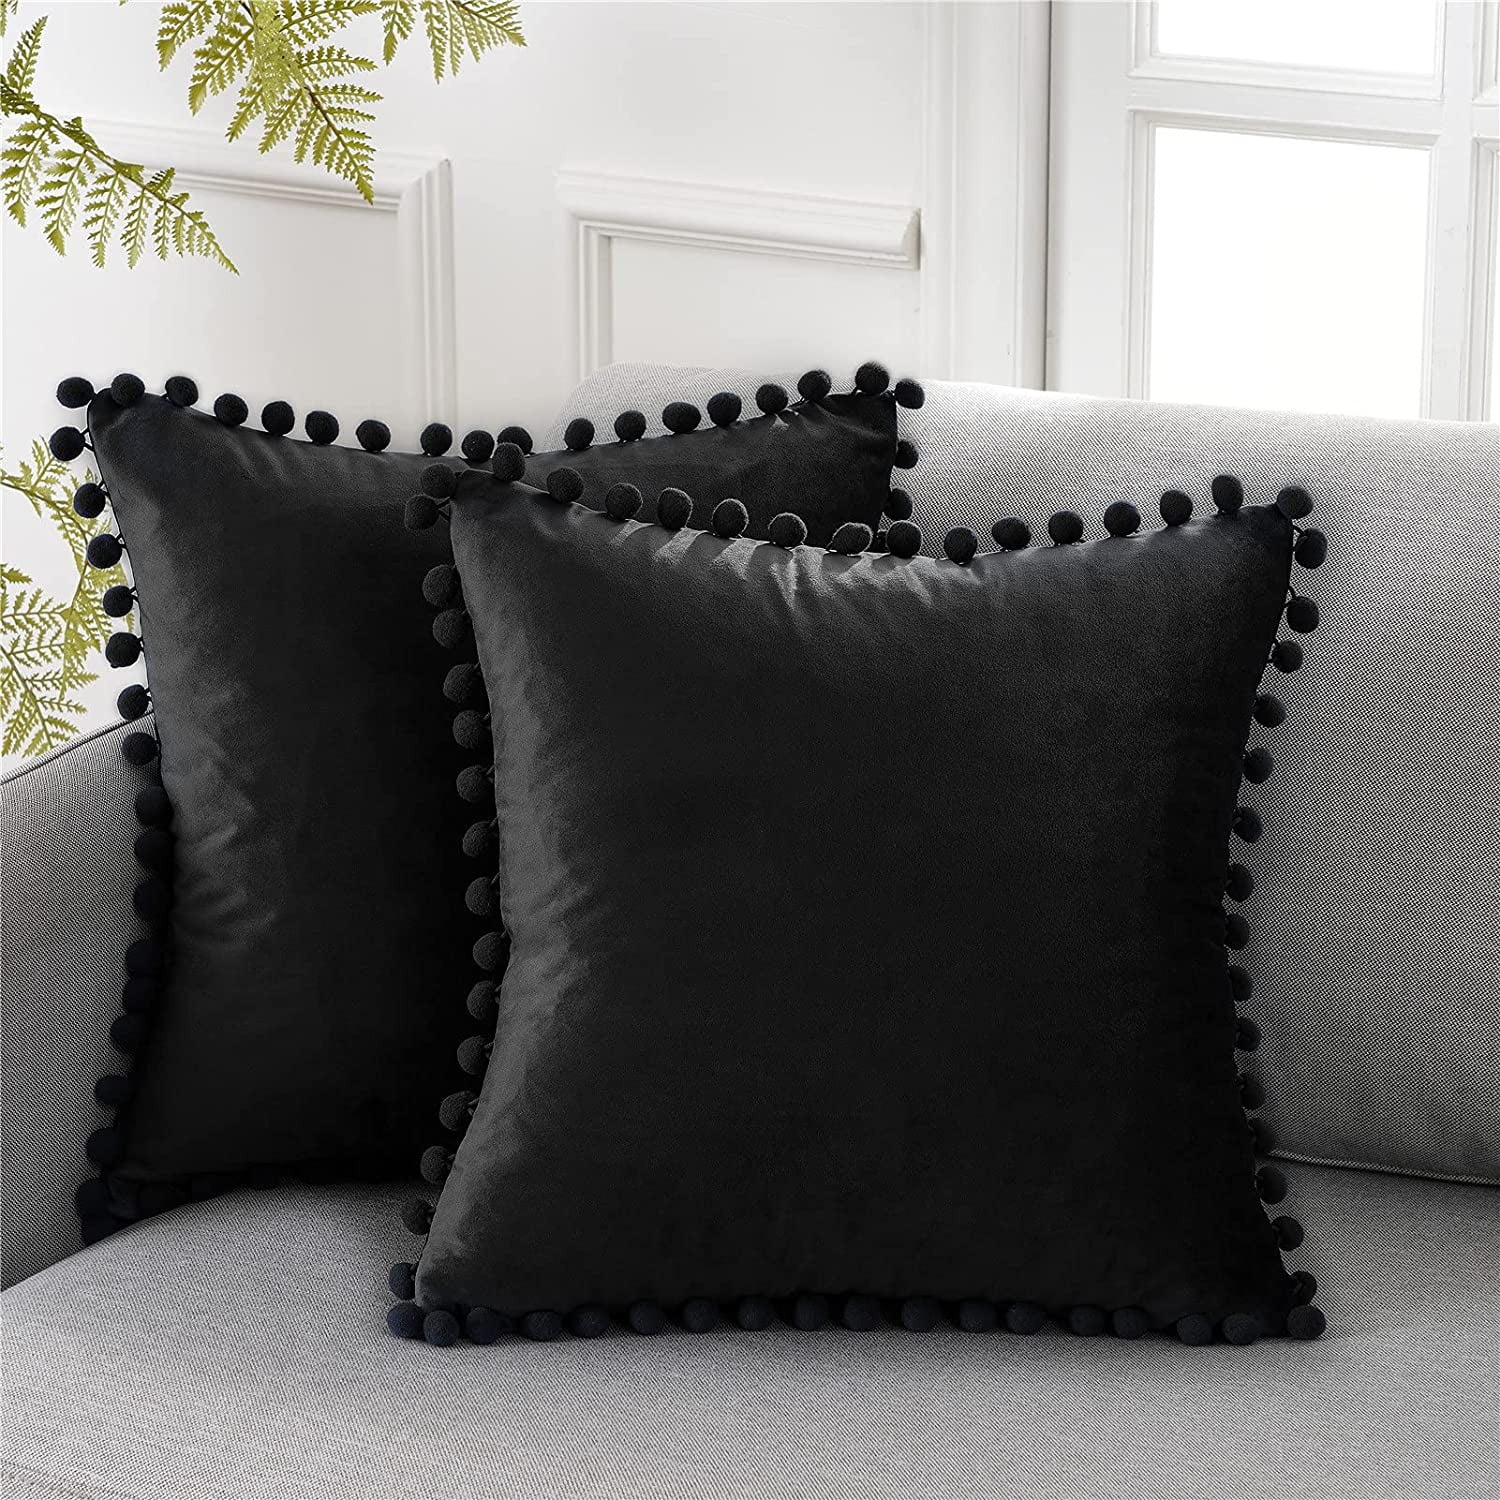 JUSPURBET Black Decorative Velvet Throw Pillow Covers 16x24,Pack of 2 Luxury Soft Solid Cushion Cases for Sofa Couch Bed